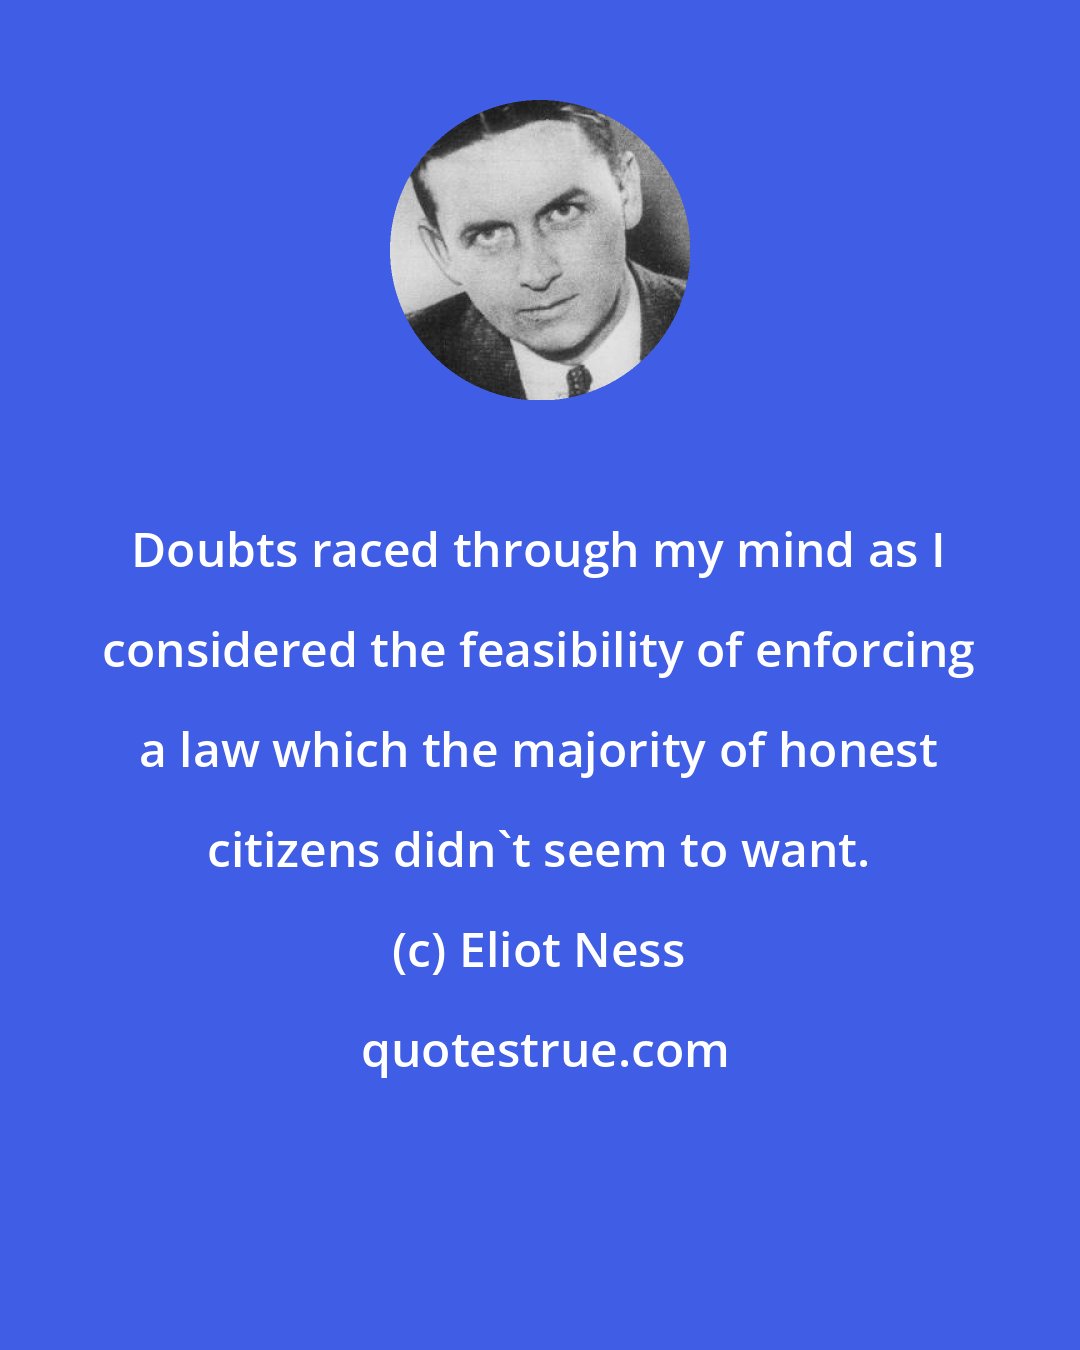 Eliot Ness: Doubts raced through my mind as I considered the feasibility of enforcing a law which the majority of honest citizens didn't seem to want.